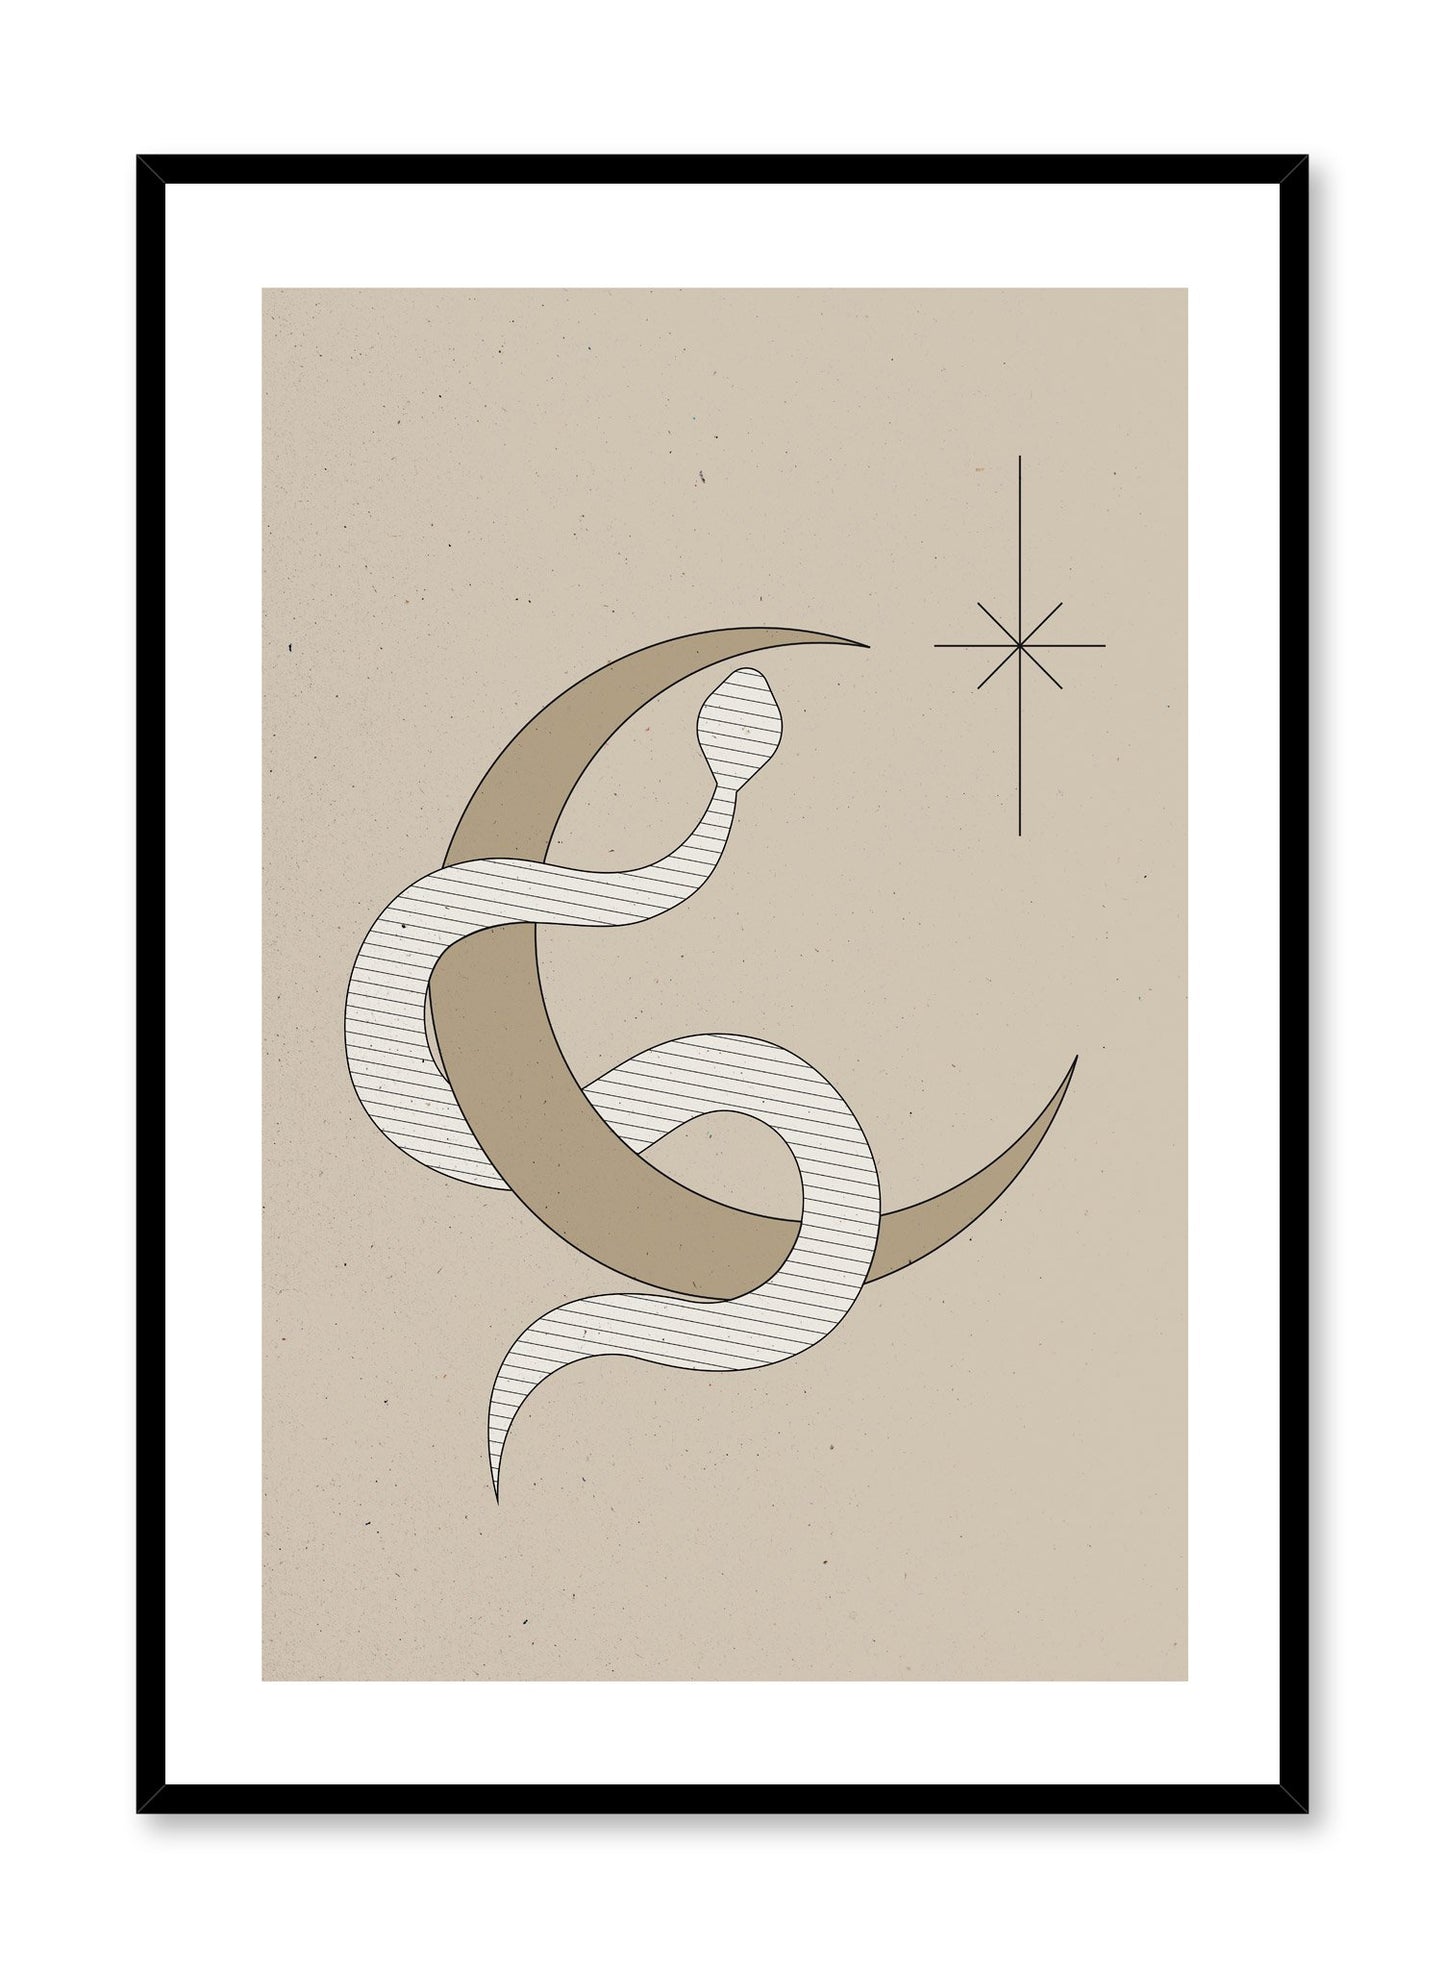 Celestial illustration poster by Opposite Wall with Serpent Moon